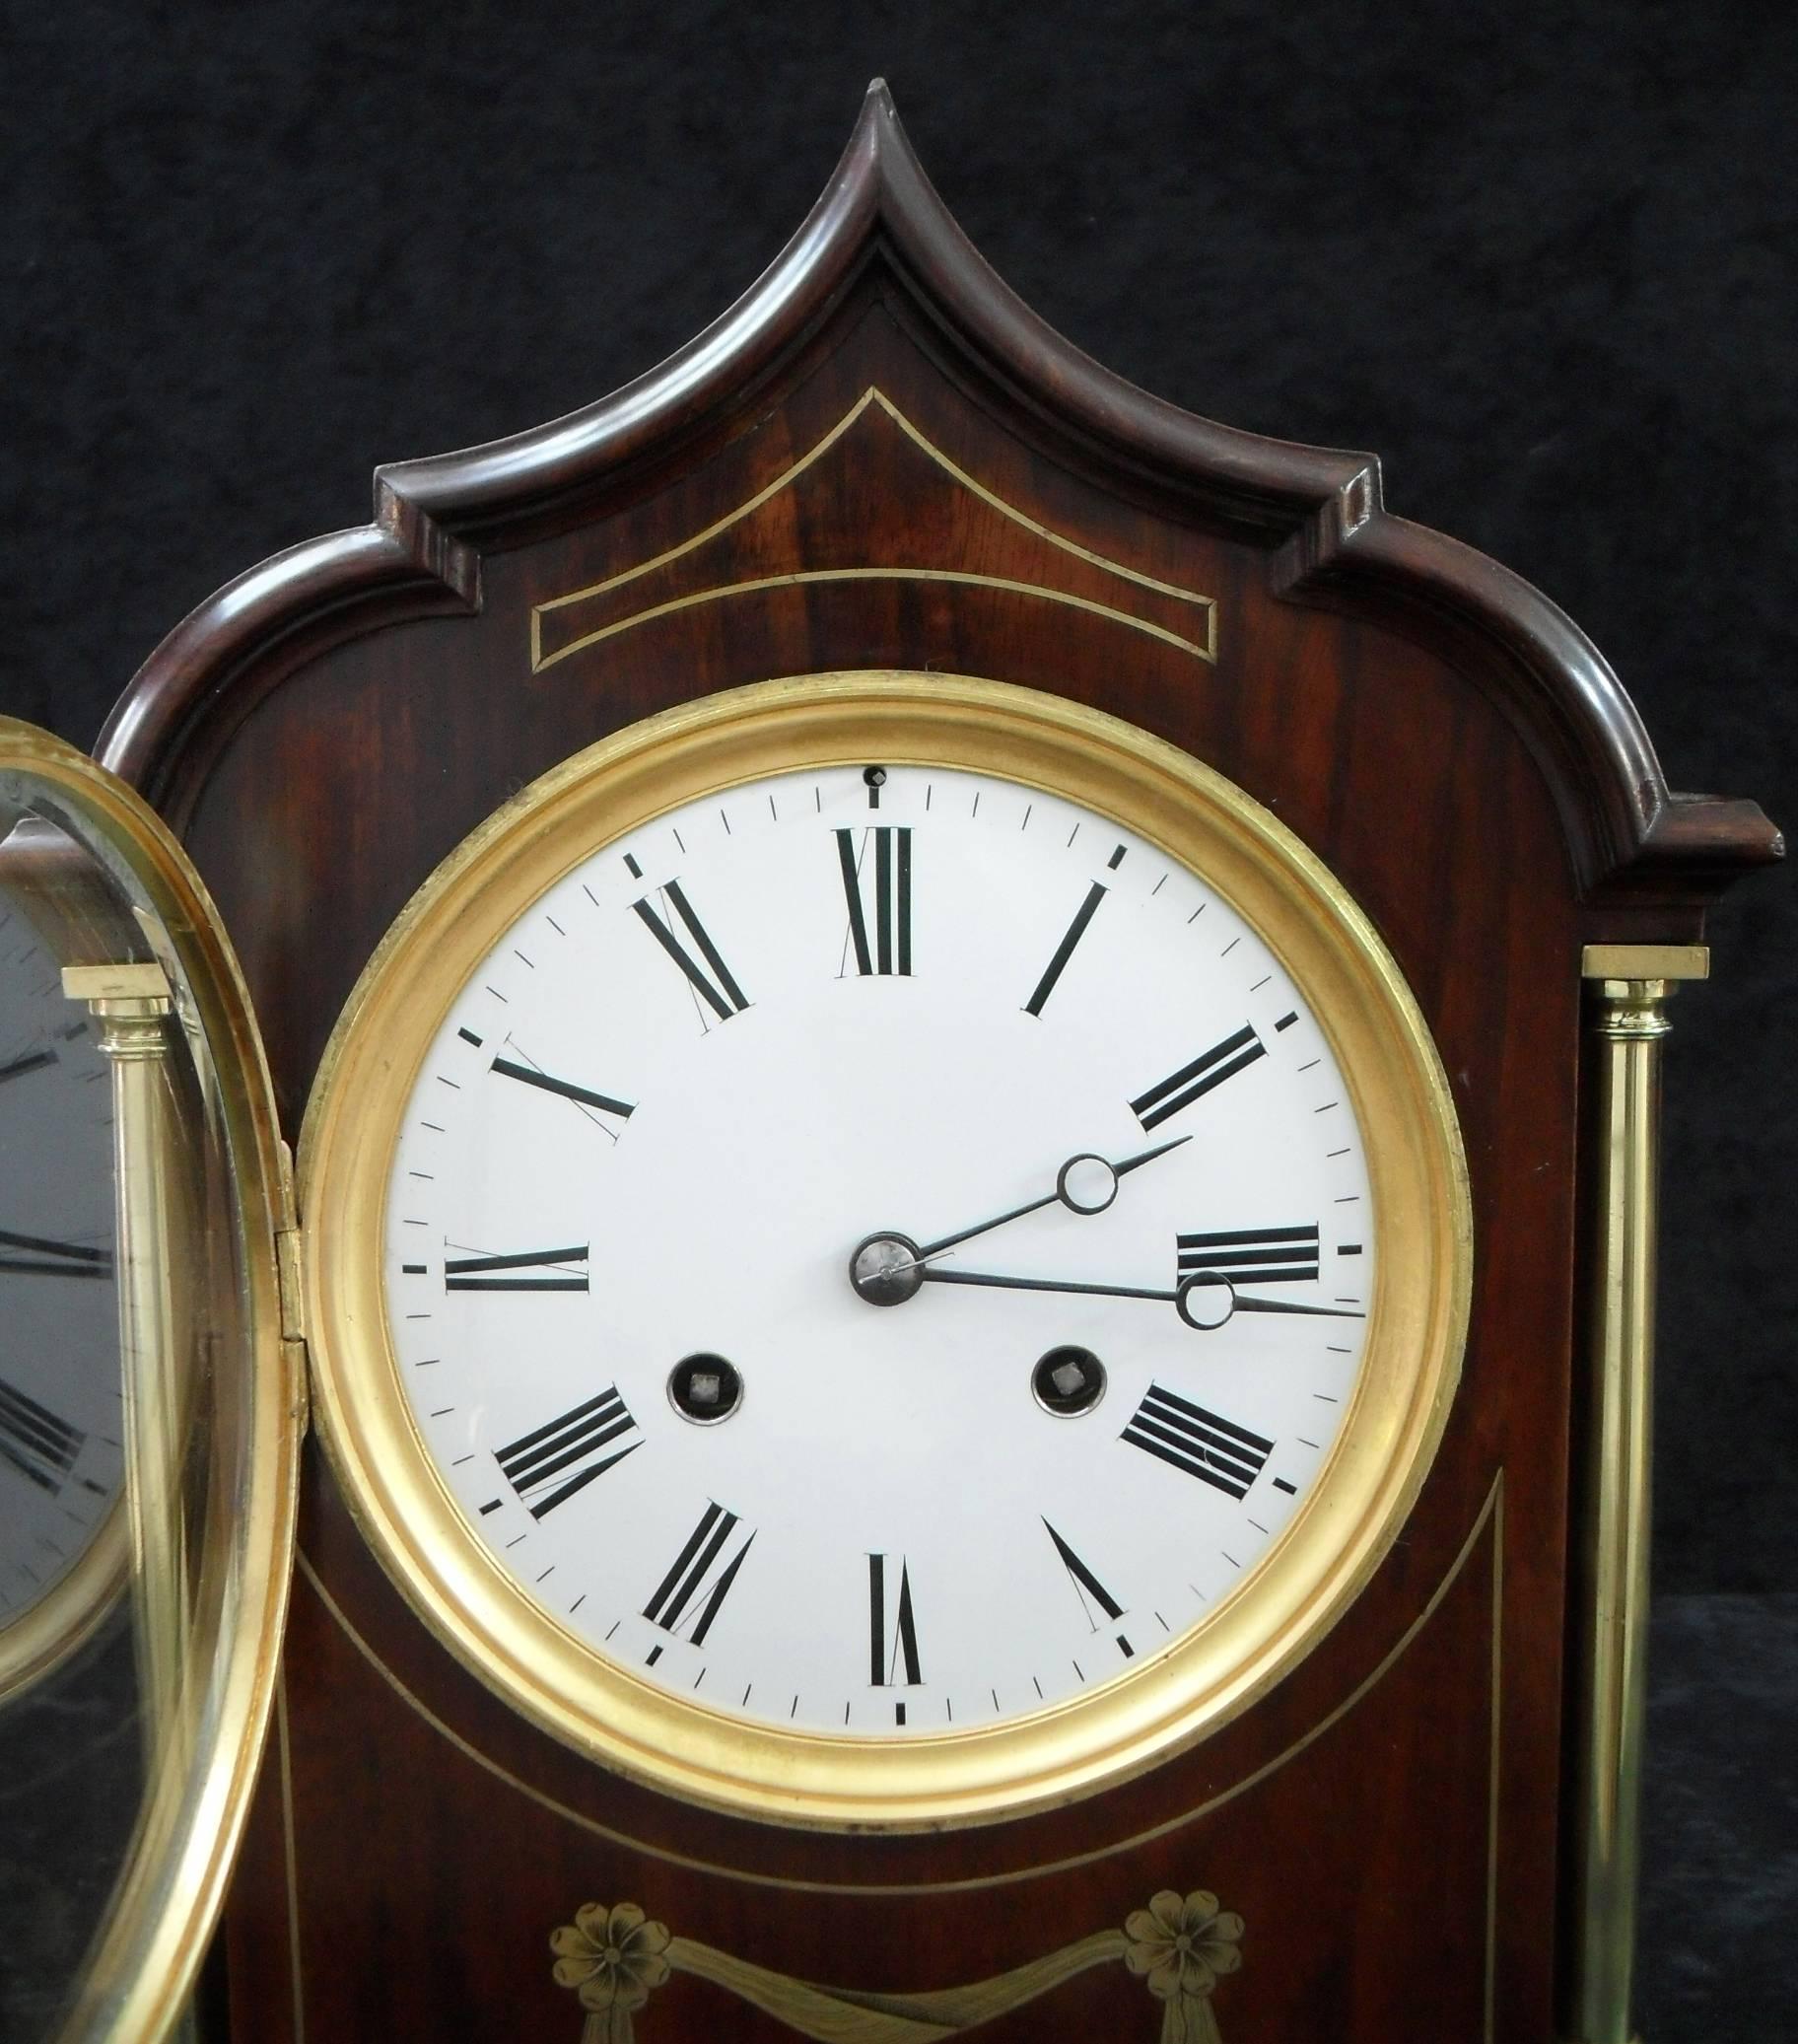 A very good quality French figured mahogany Belle Époque mantel clock with brass inlay and brass columns to the front and architectural shaped top. The clock has a white enamel dial with a French eight day movement which strikes the hours and half